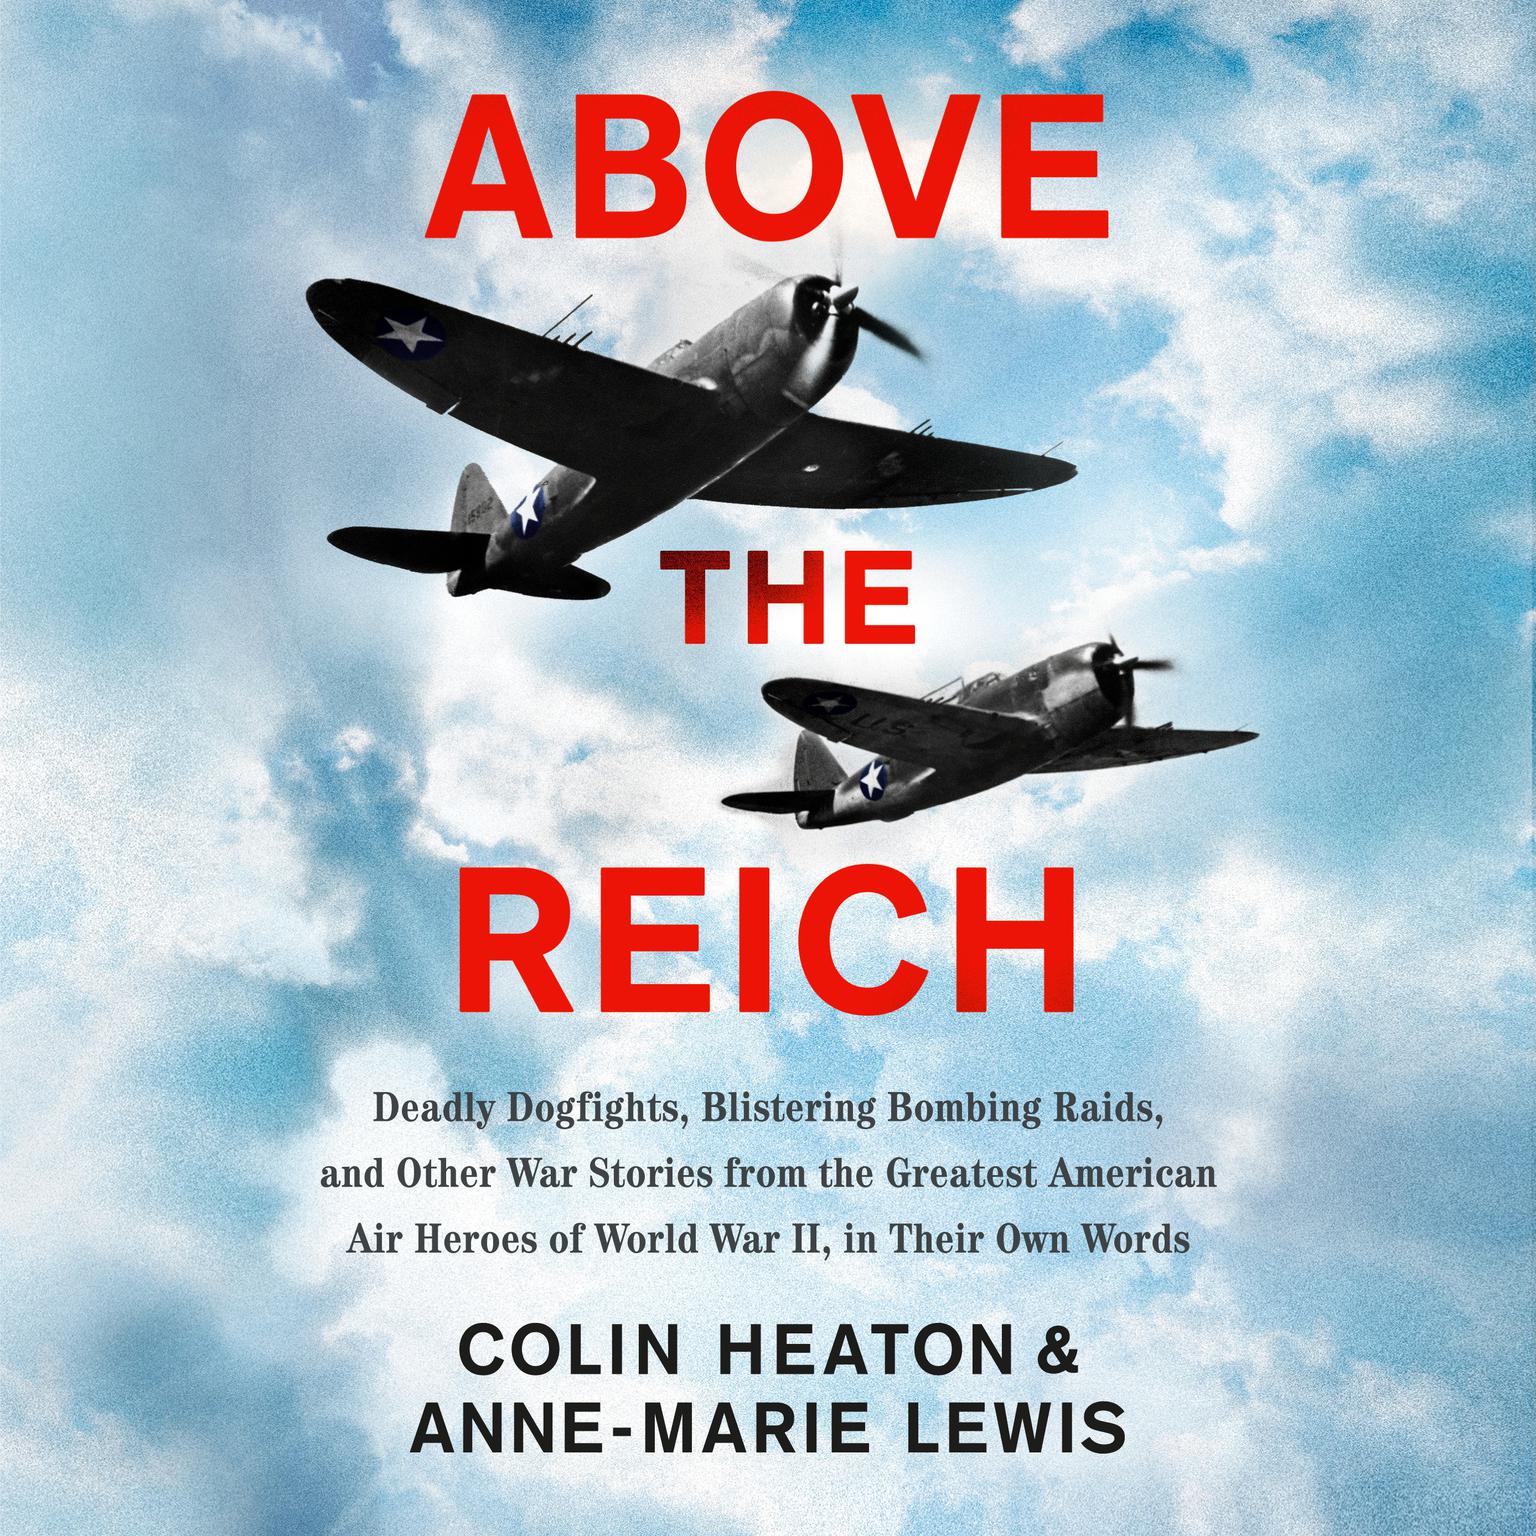 Above the Reich: Deadly Dogfights, Blistering Bombing Raids, and Other War Stories from the Greatest American Air Heroes of World War II, in Their Own Words Audiobook, by Anne-Marie Lewis